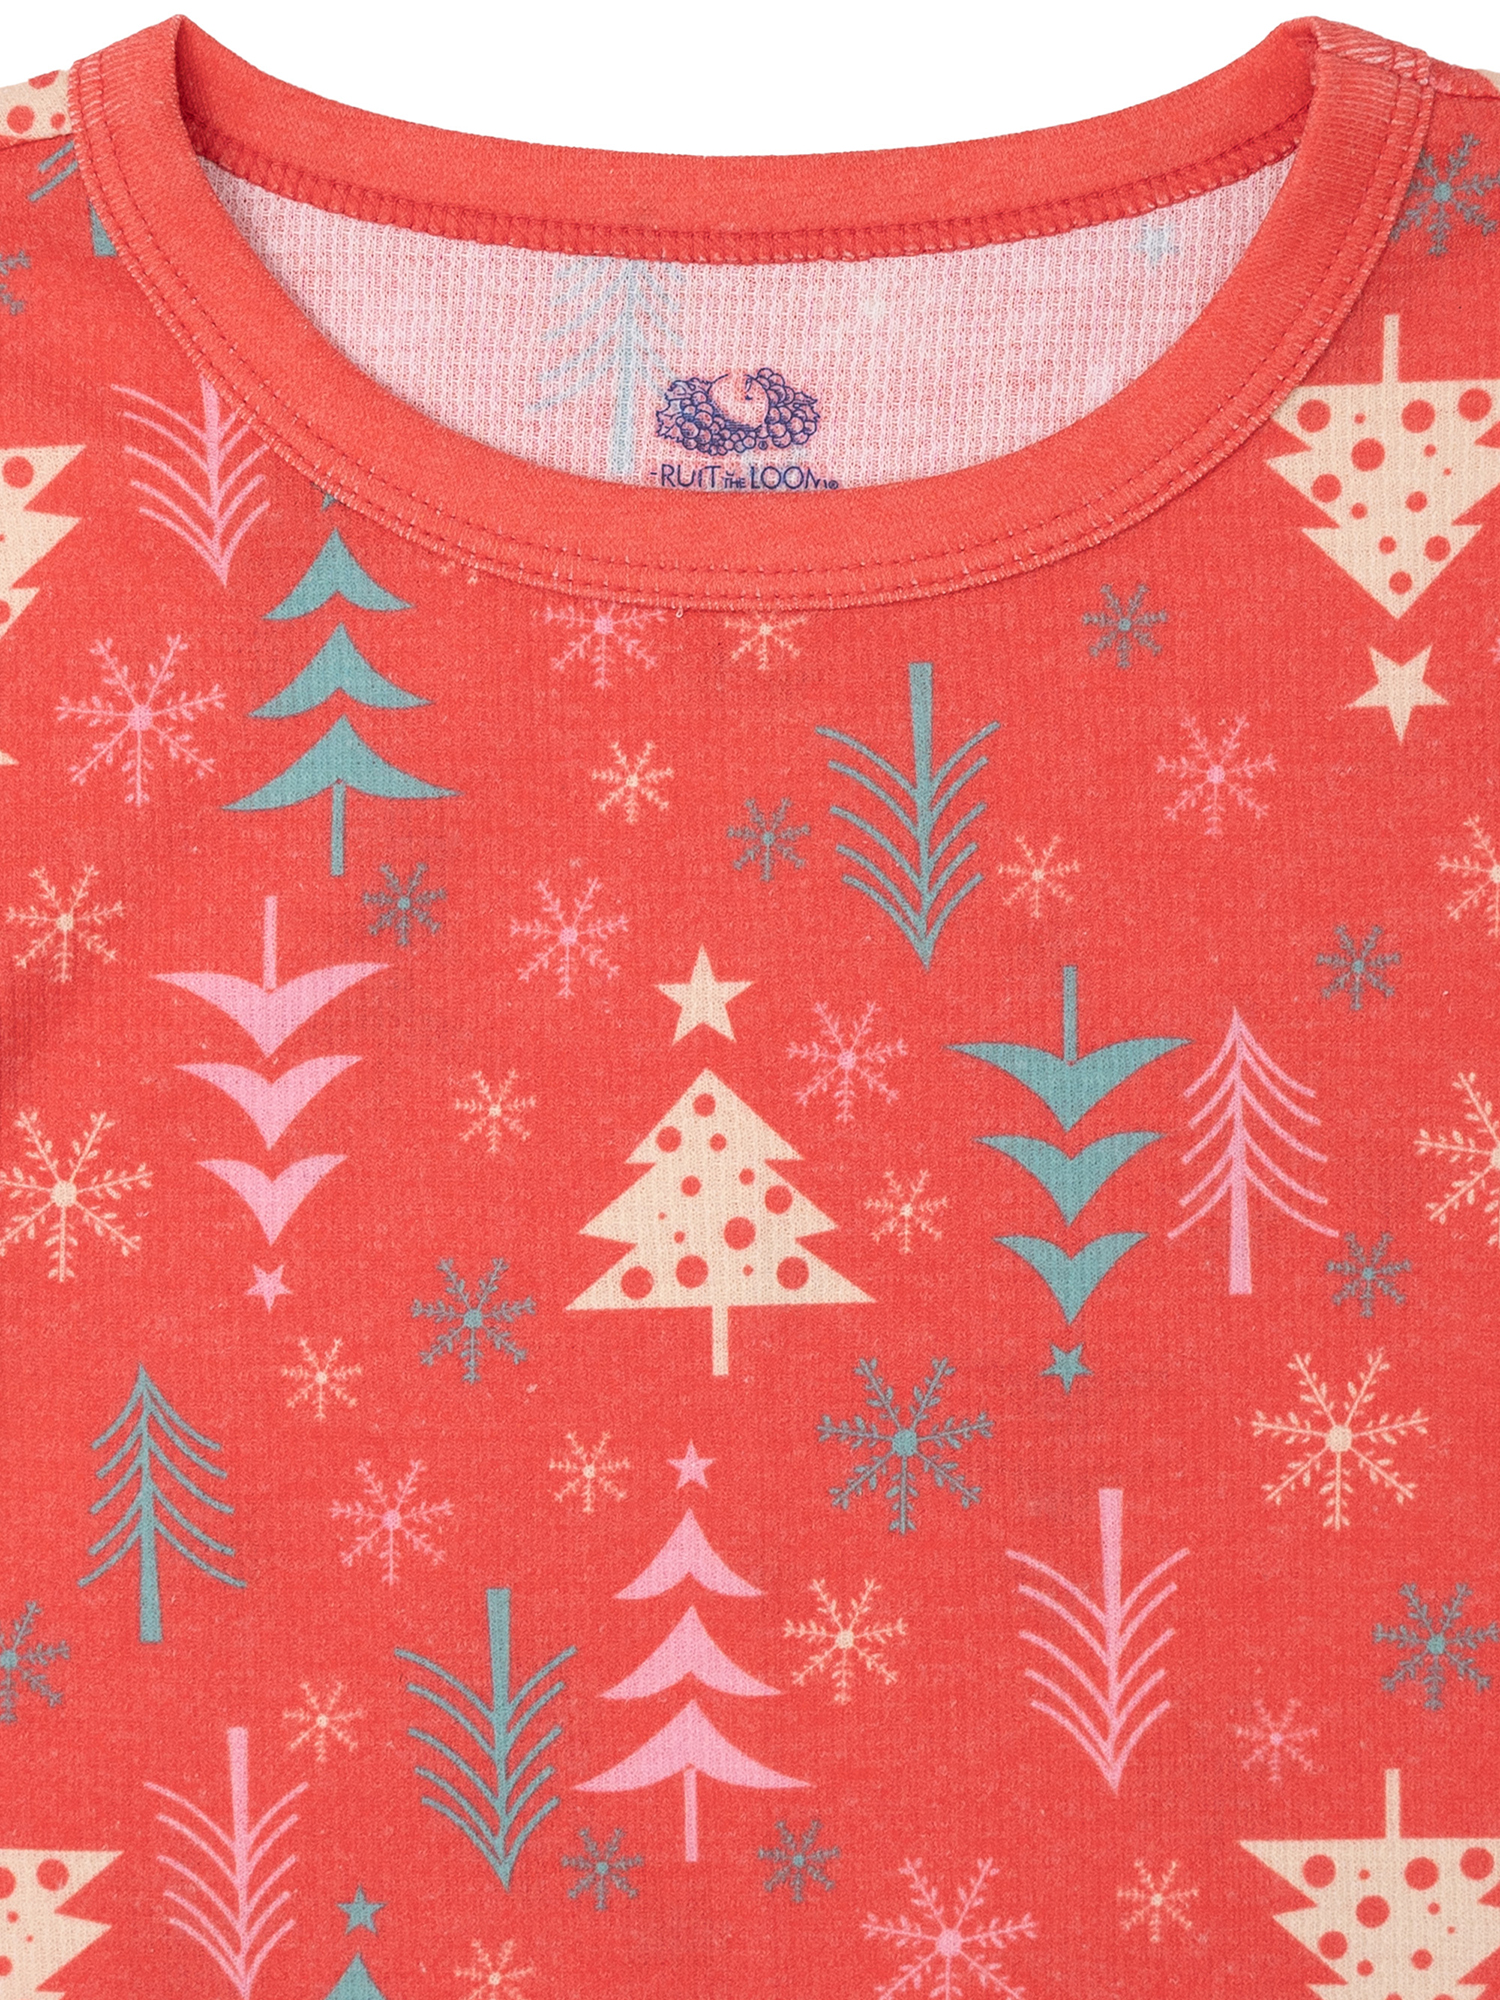 Fruit of the Loom Boy's & Girl's Holiday Thermal Top and Bottom Set, Sizes 4-18 - image 3 of 9